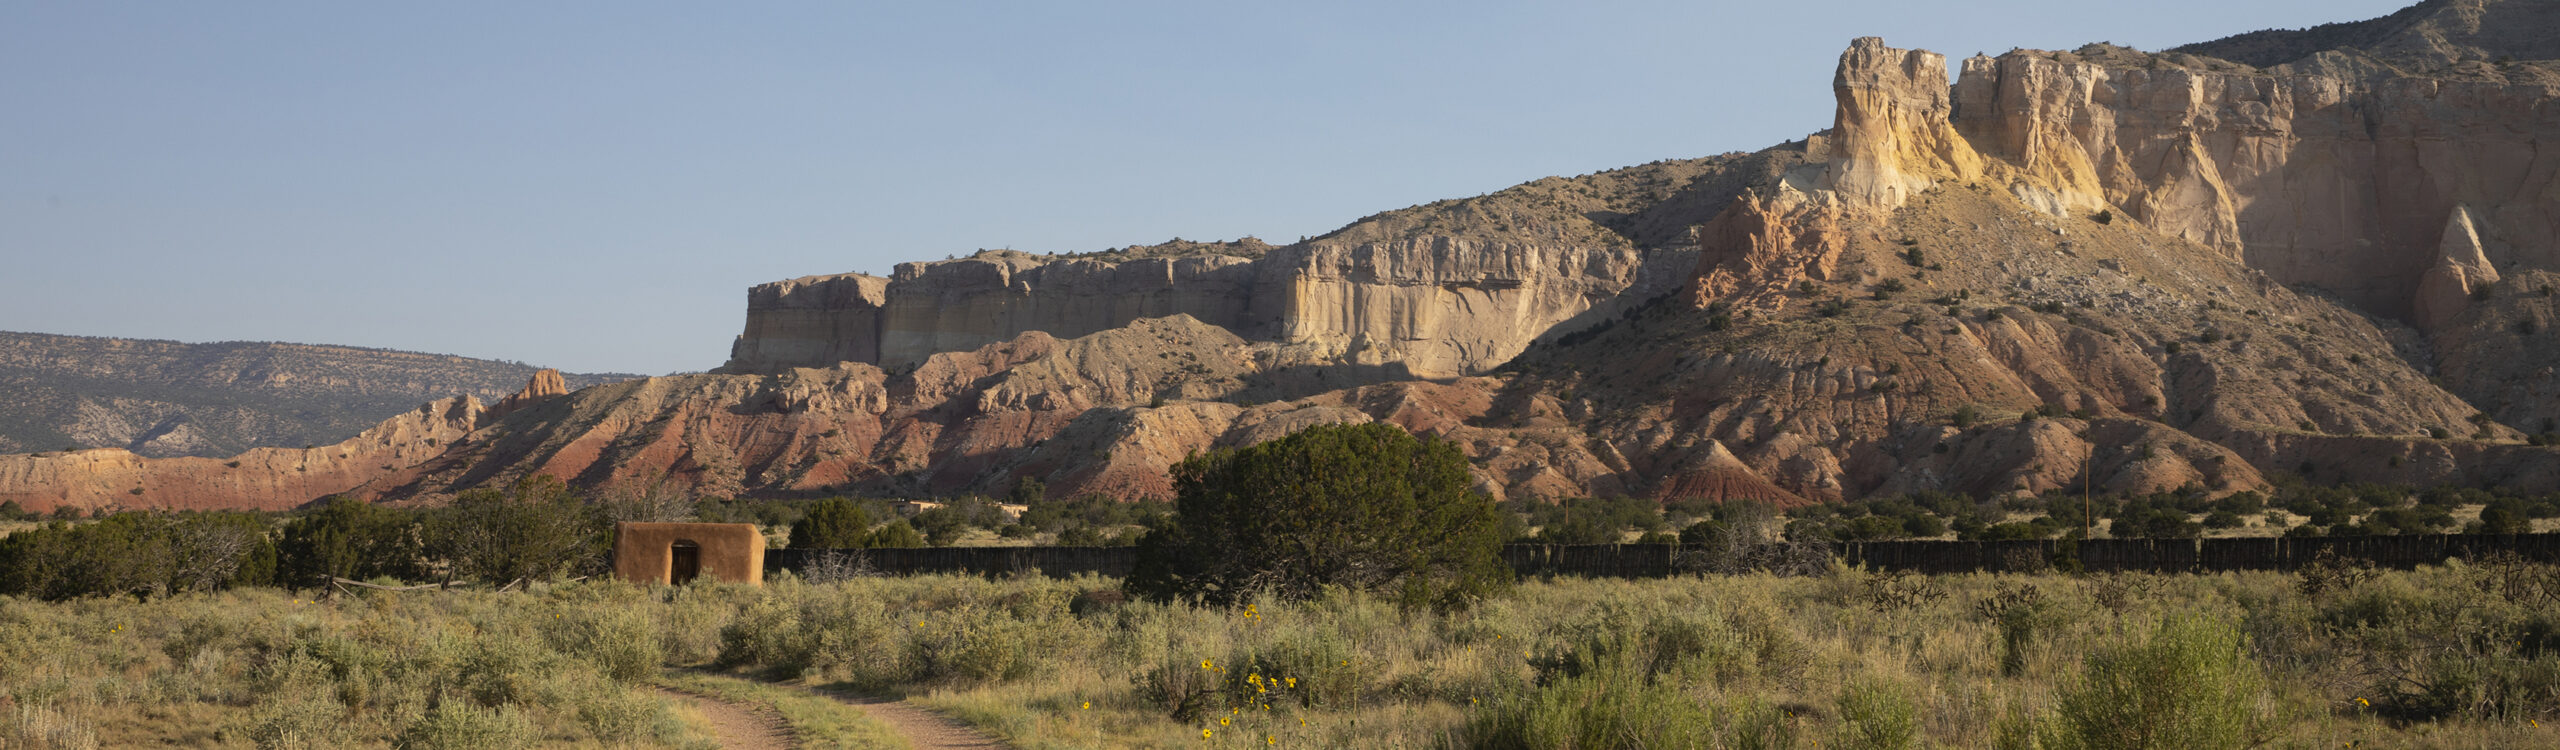 Landscape photograph of tall cliffs in shades of golden and red rock with a blue sky in the background. Green bushes and trees are at the bottom of the photo and to the left is a dirt road and a small square adobe building with a door.